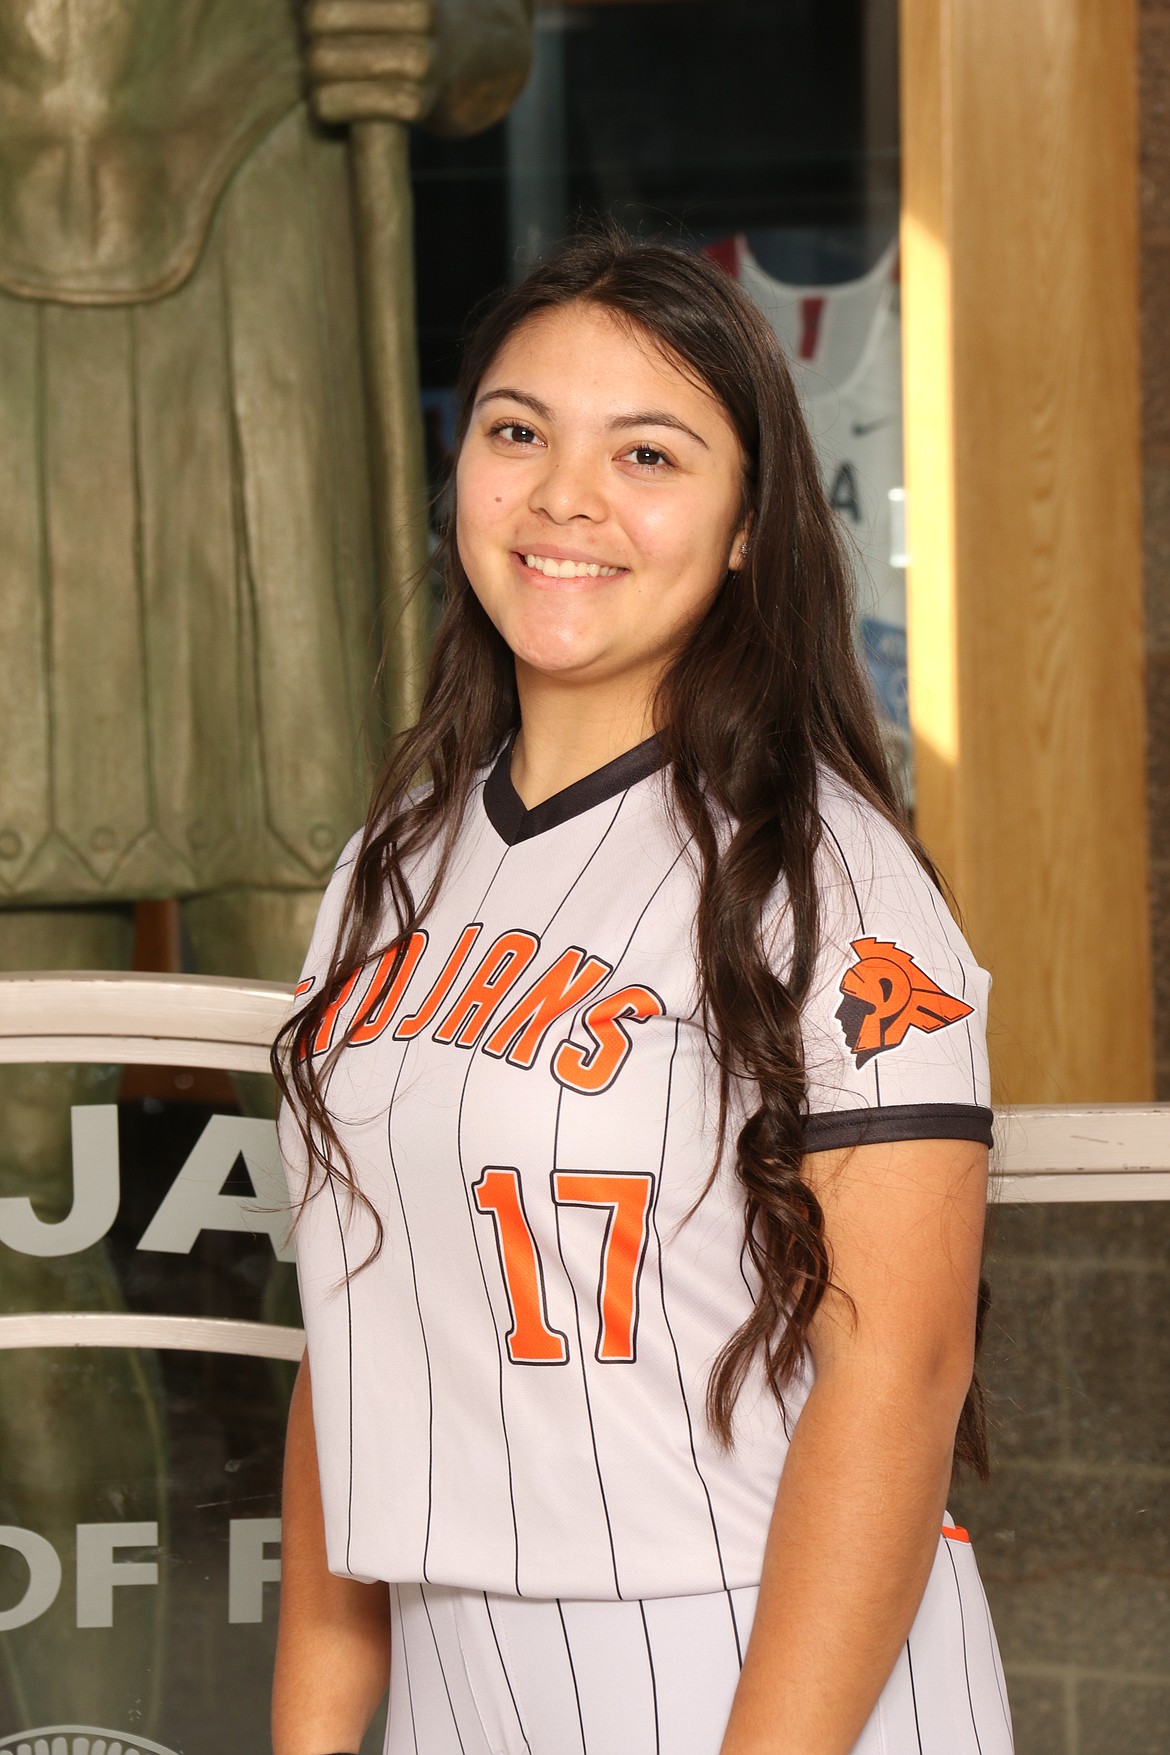 Courtesy photo
Senior softball player Alyssa Krause is this week's Post Falls High School Athlete of the Week. Krause had 16 plate appearances this past weekend in the Tri-Cities and had a .714 batting average with 10 hits — 4 base hits, 2 doubles and 4 home runs (including an opposite-field grand slam against Moses Lake) with 15 RBIs.